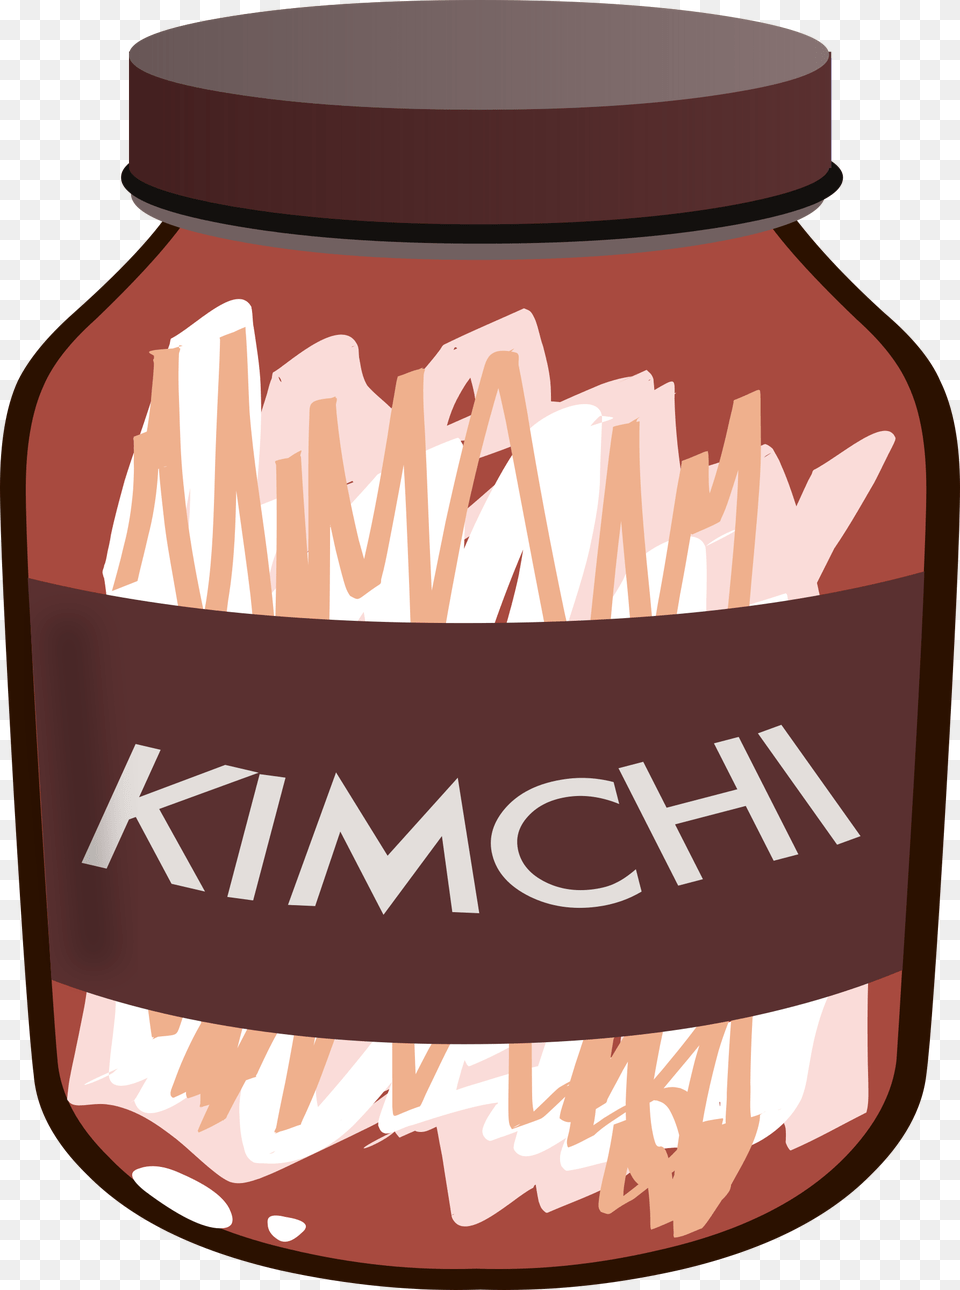 This Free Icons Design Of Kimchi Jar, Pottery Png Image